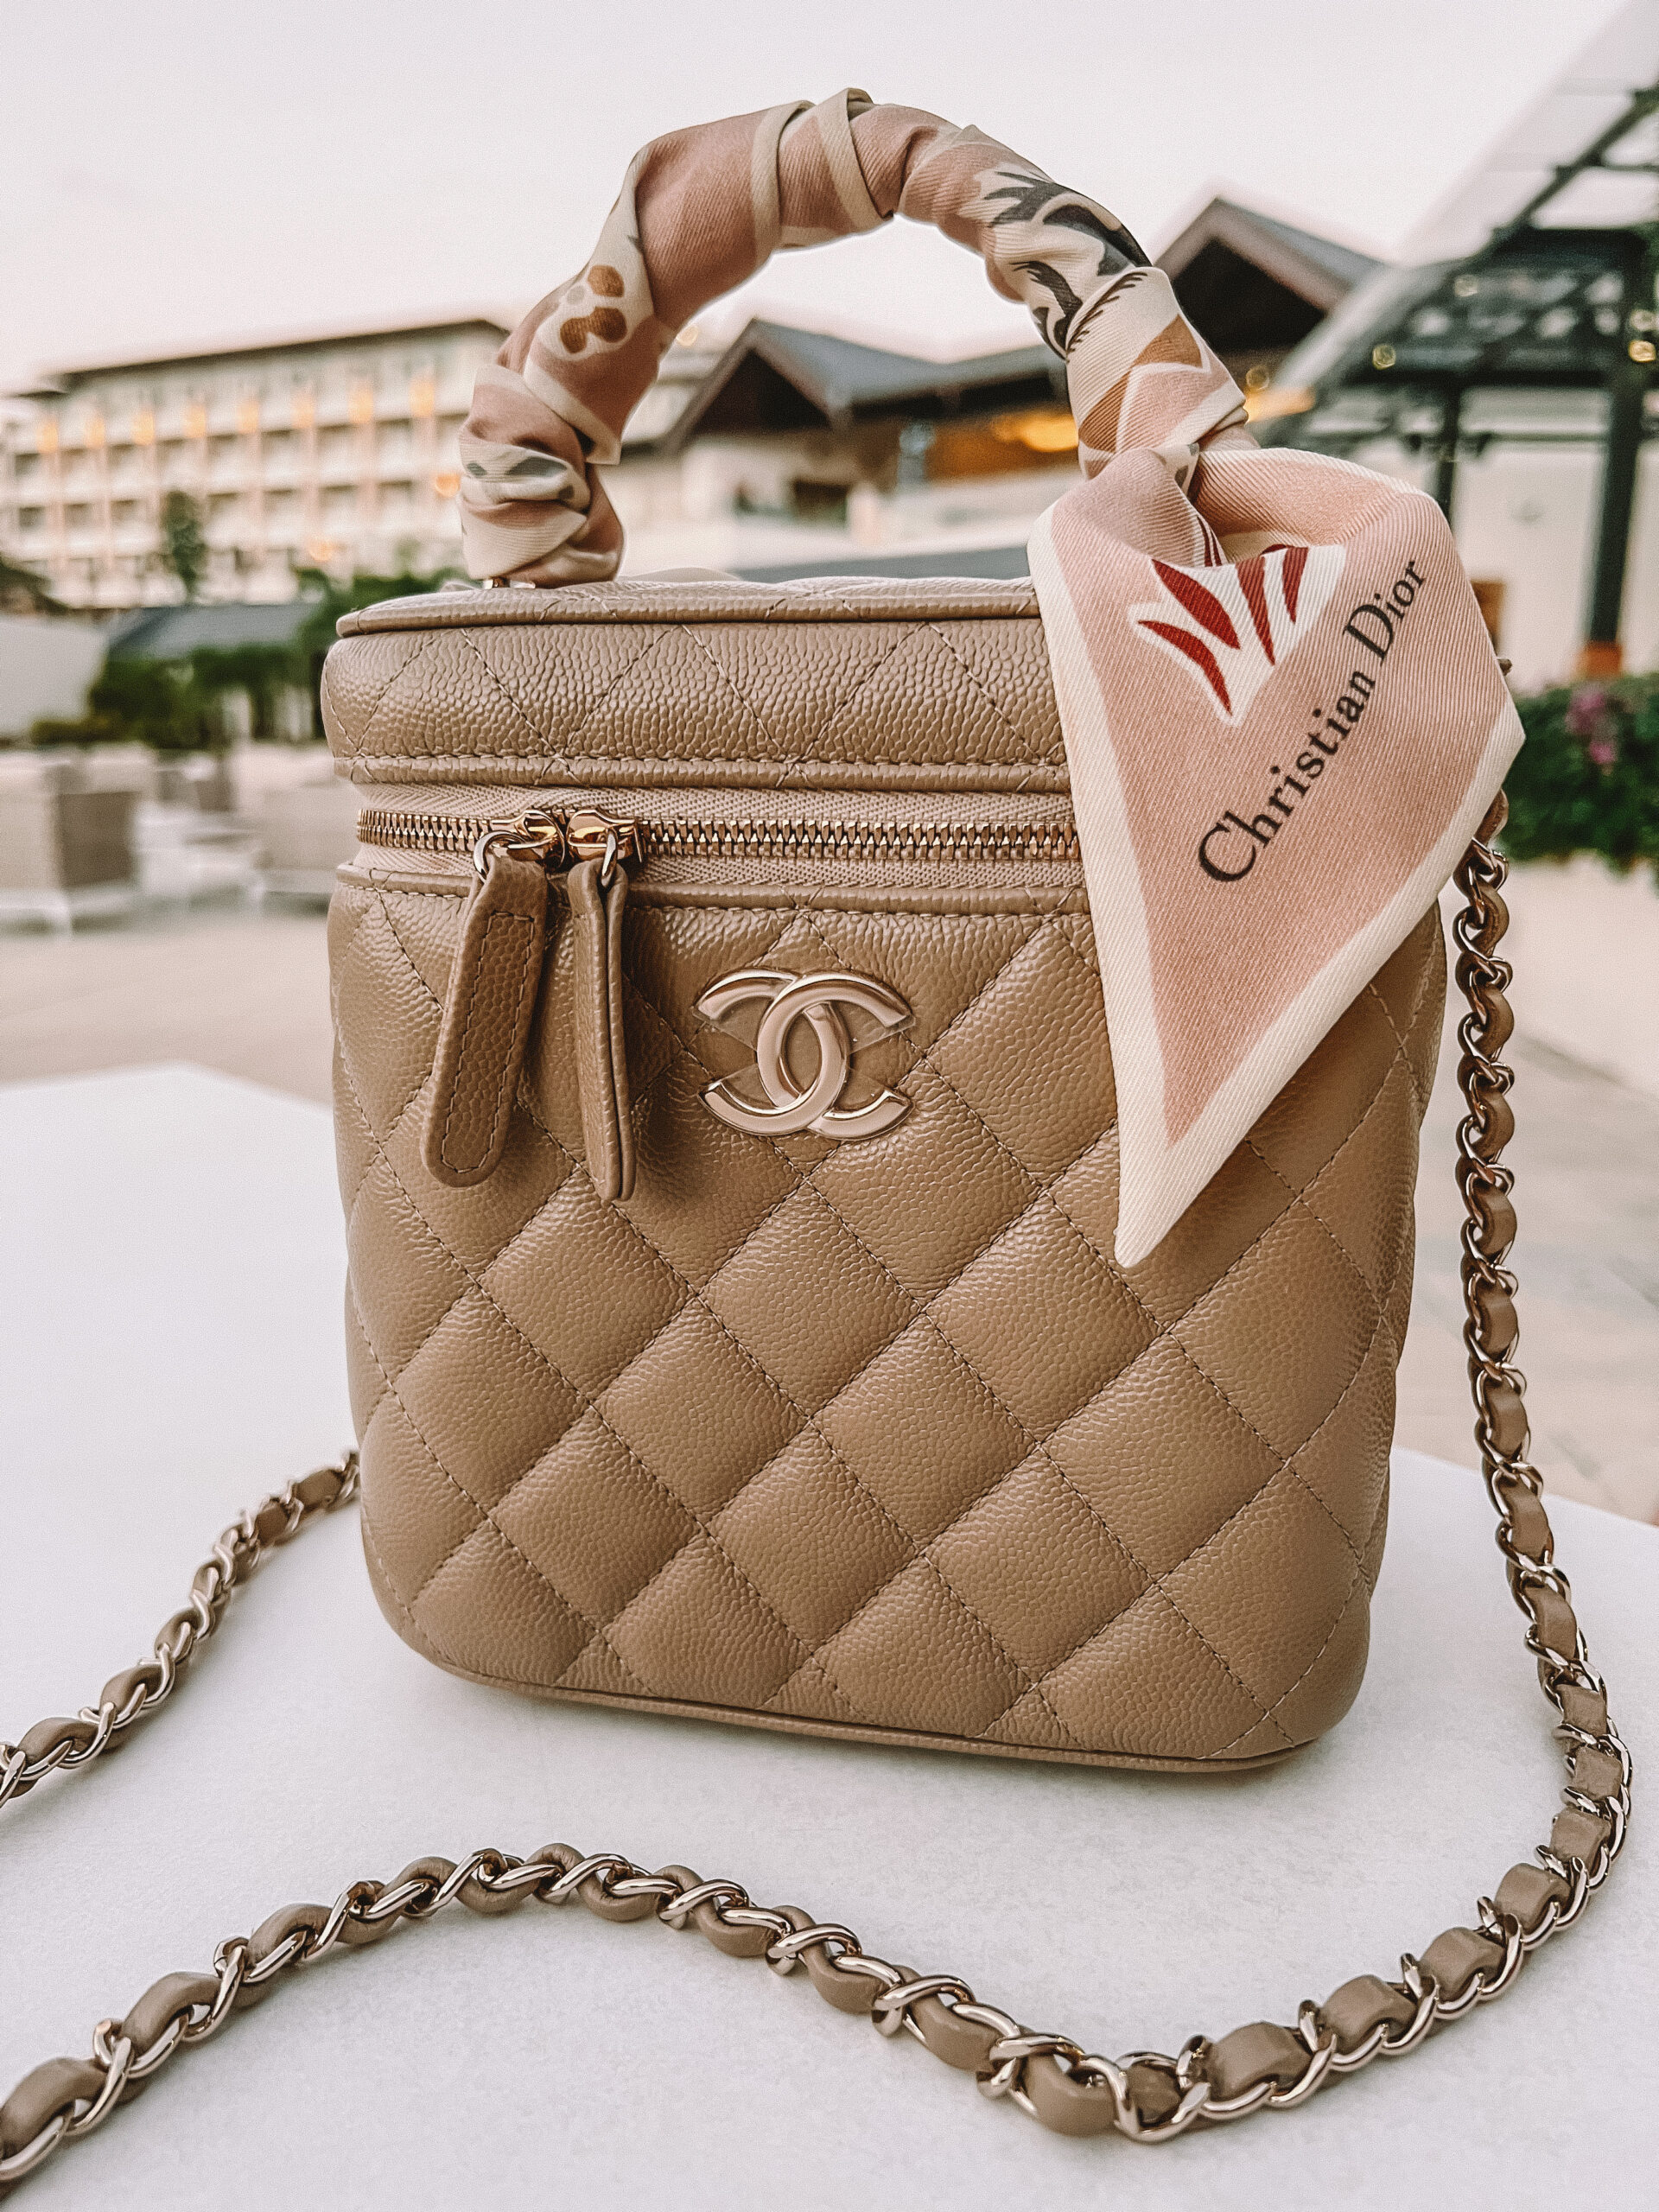 Why buy a preloved Louis Vuitton Speedy? – The Daily Luxe